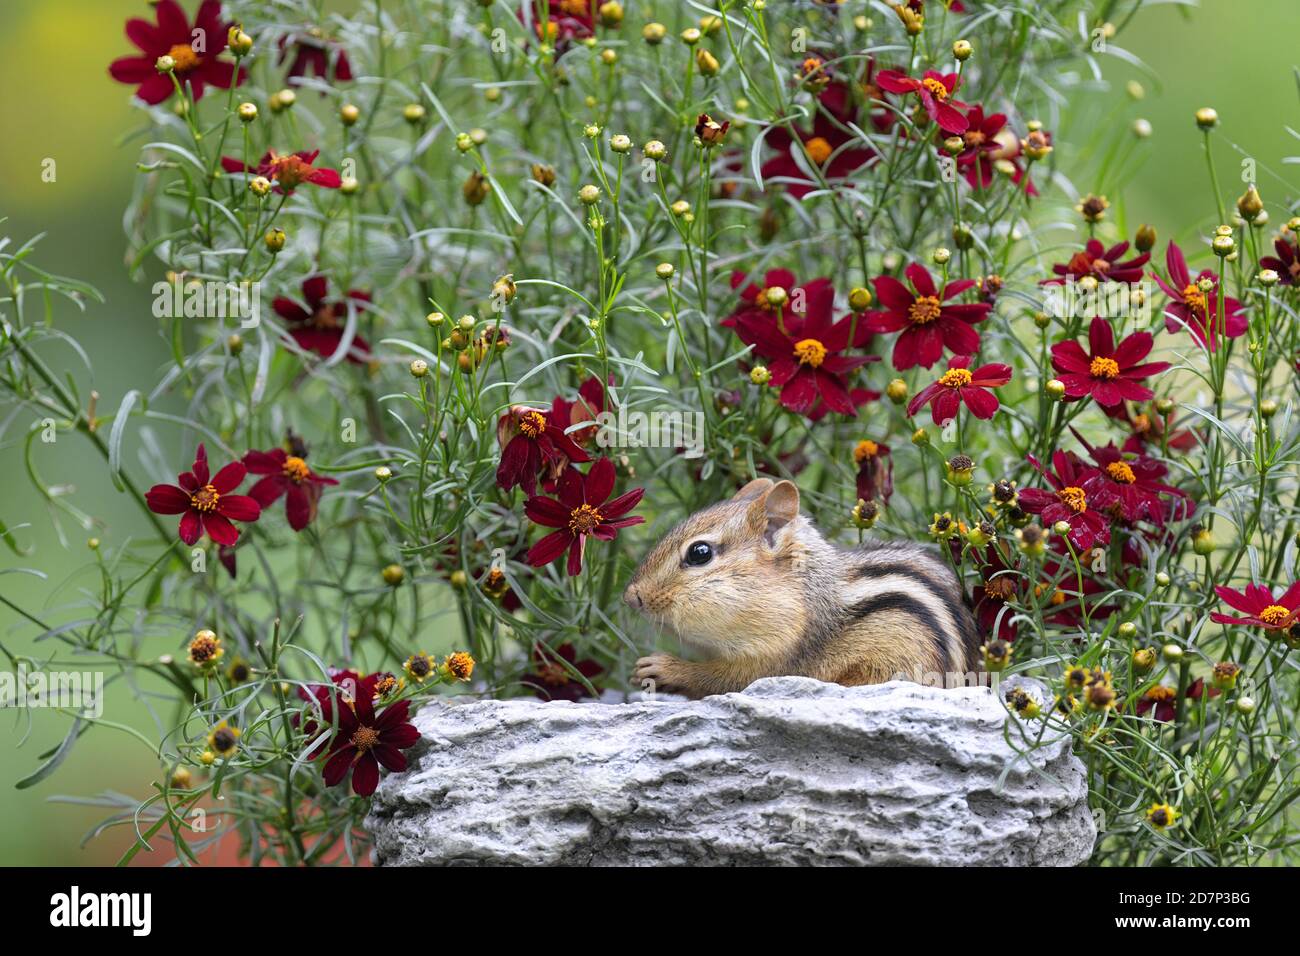 An Eastern chipmunk eating among some red flowers Stock Photo